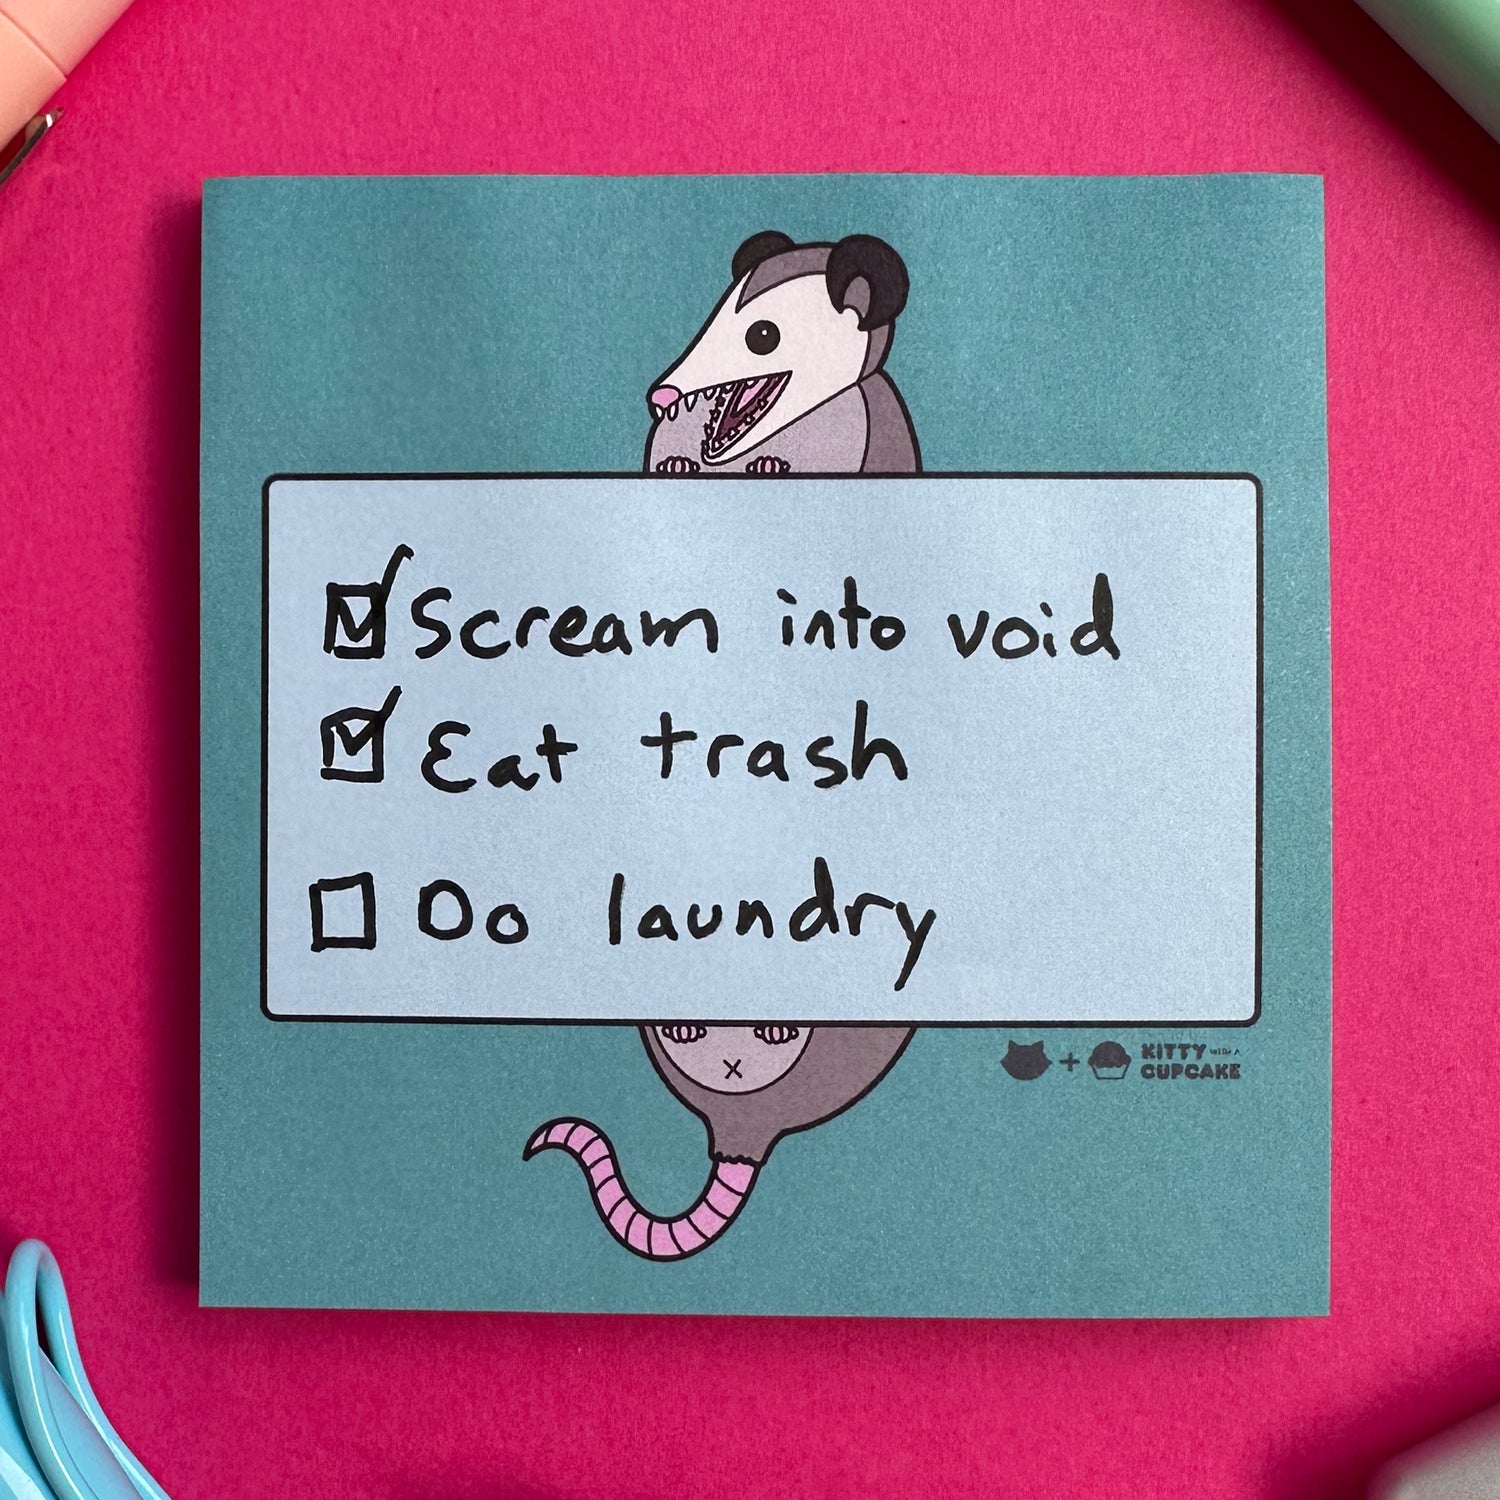 A blue square sticky note pad featuring an illustration of an opossum holding a light blue rectangle with a list written in it. The checklist reads "Scream into void, Eat Trash, Do Laundry" the first two items are checked off but the last is not. The sticky notes are on a hot pink background with some pens around them. 